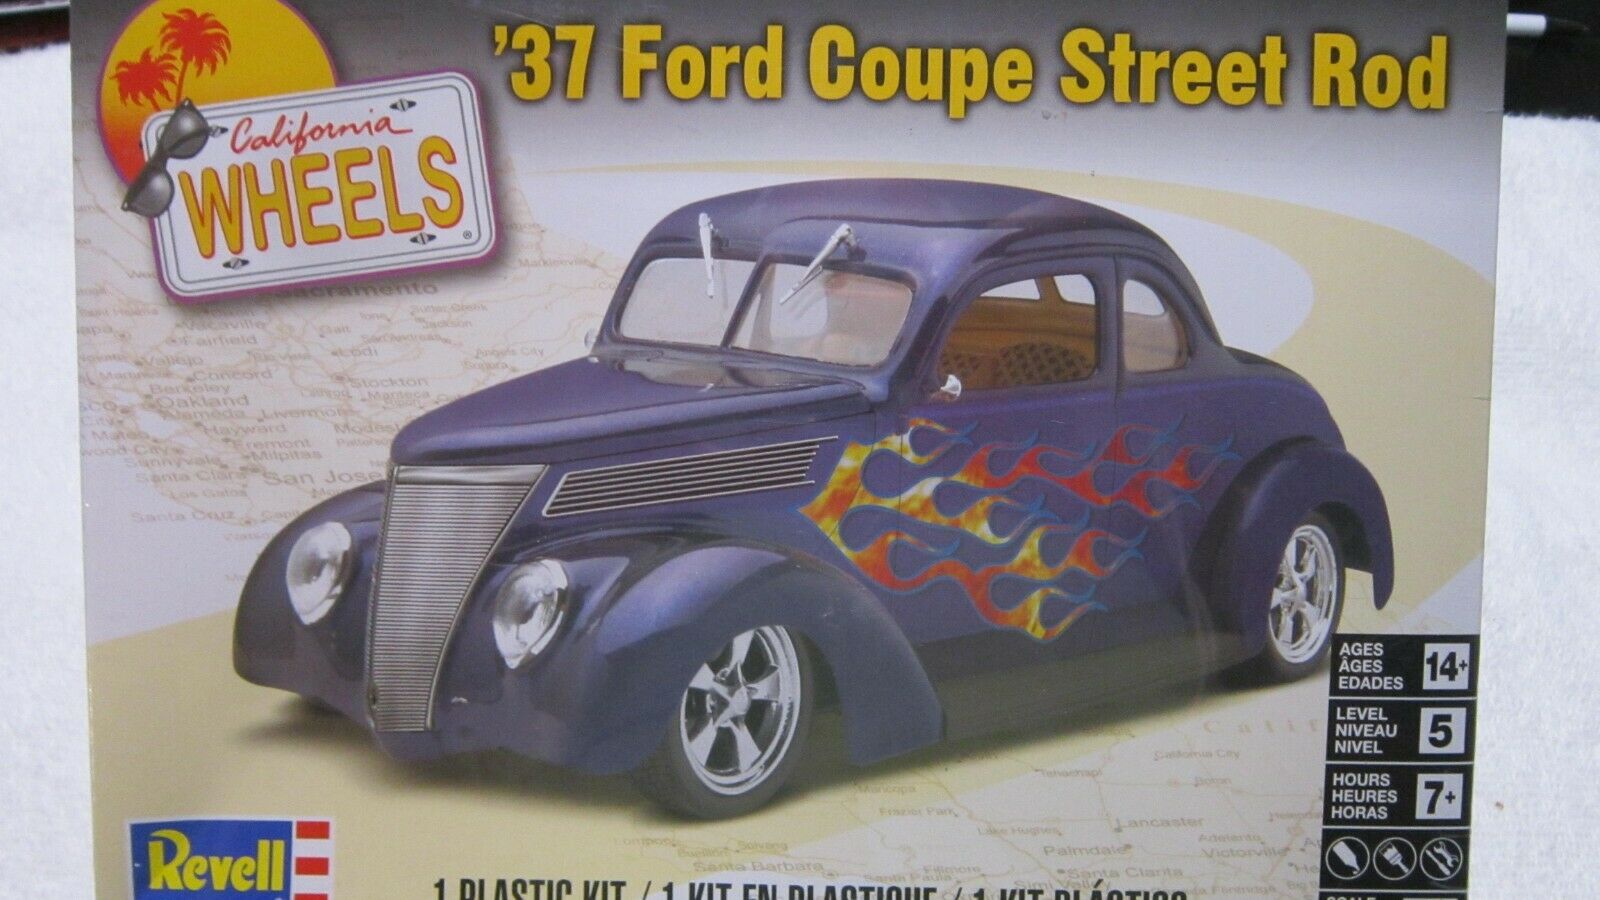 Revell  37 Ford Coupe Street Rod 1/24 Scale Skill Level 5